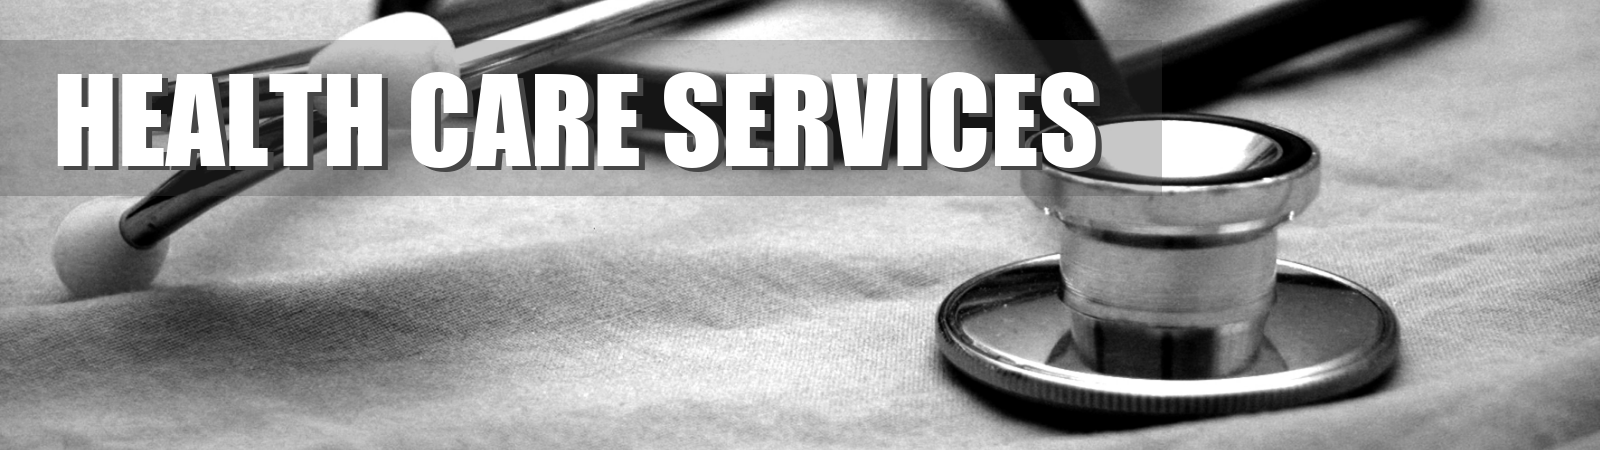 Health and Care Services